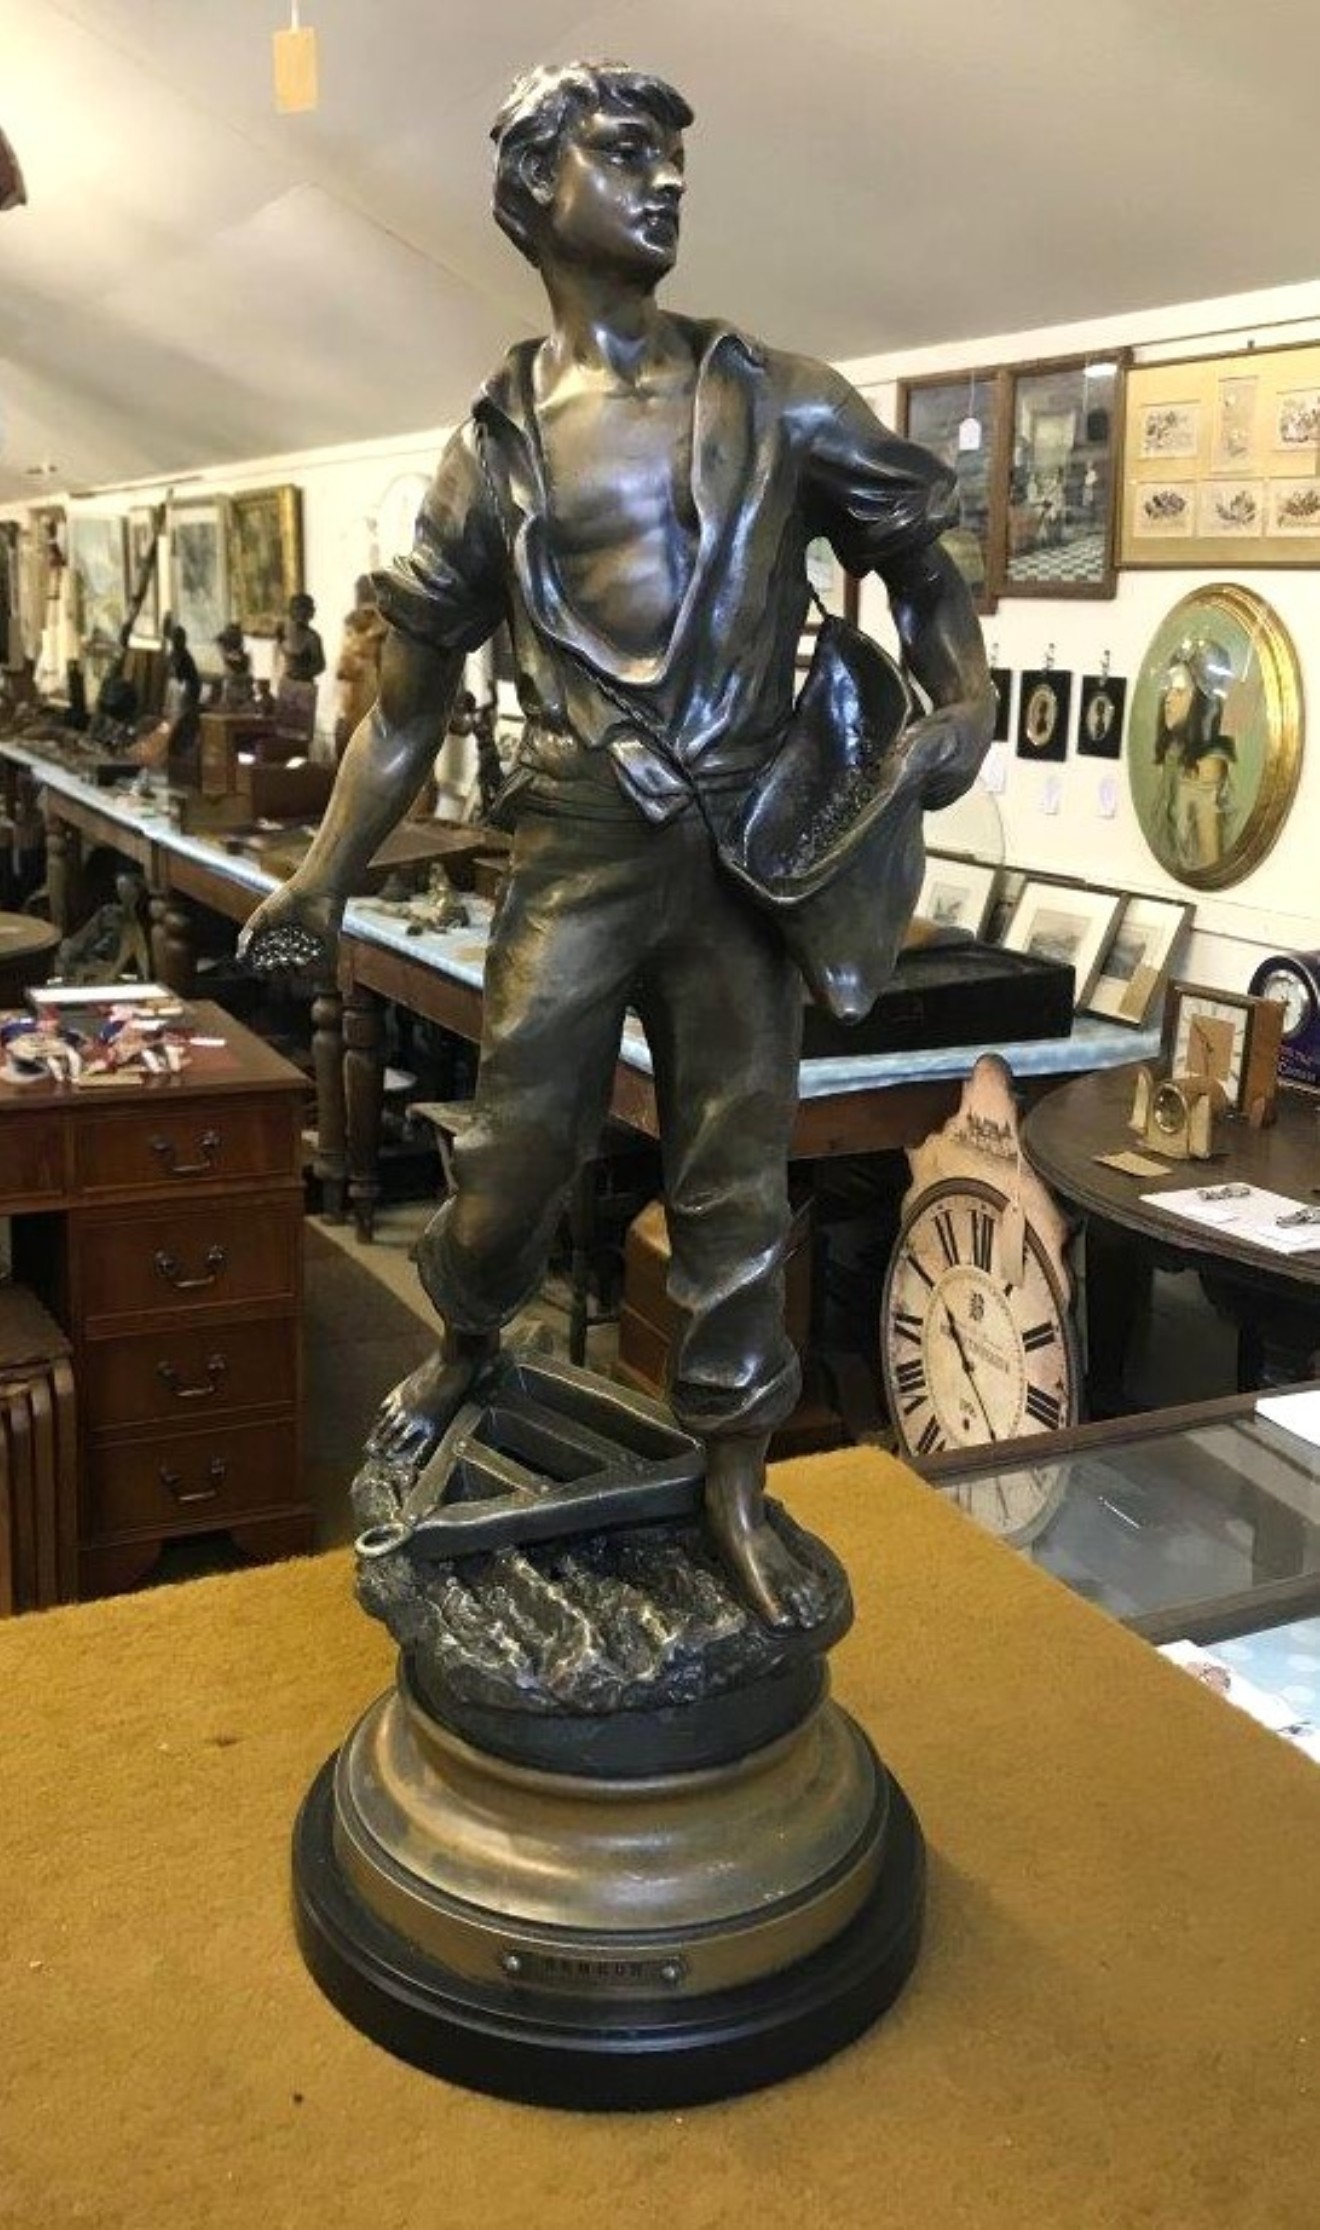 Antique Pair of French Bronzed Spelter Figures 'Semeur' and 'Botteleuse' (Sower and Baler) After Emile Rousseau (Sculptor)